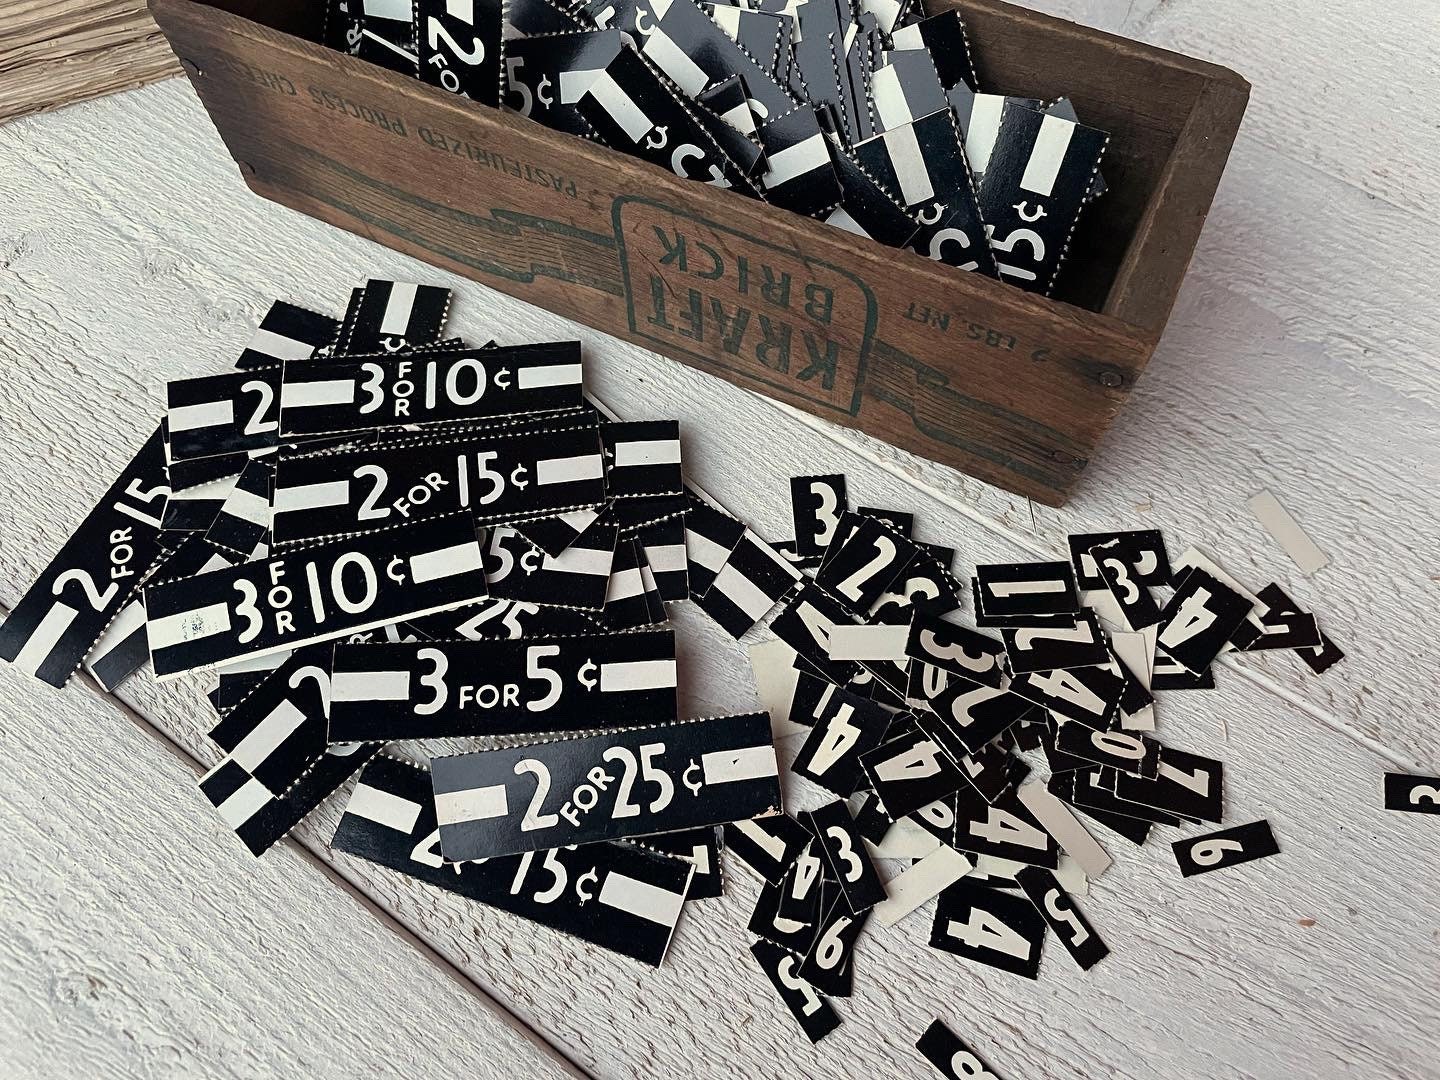 Wooden Price Tags, Mini Price Tag 12 Pcs, Price Display for Market, Store  and Cafes. Сircular Price Tags, Square Price Tags. Market Stand. 